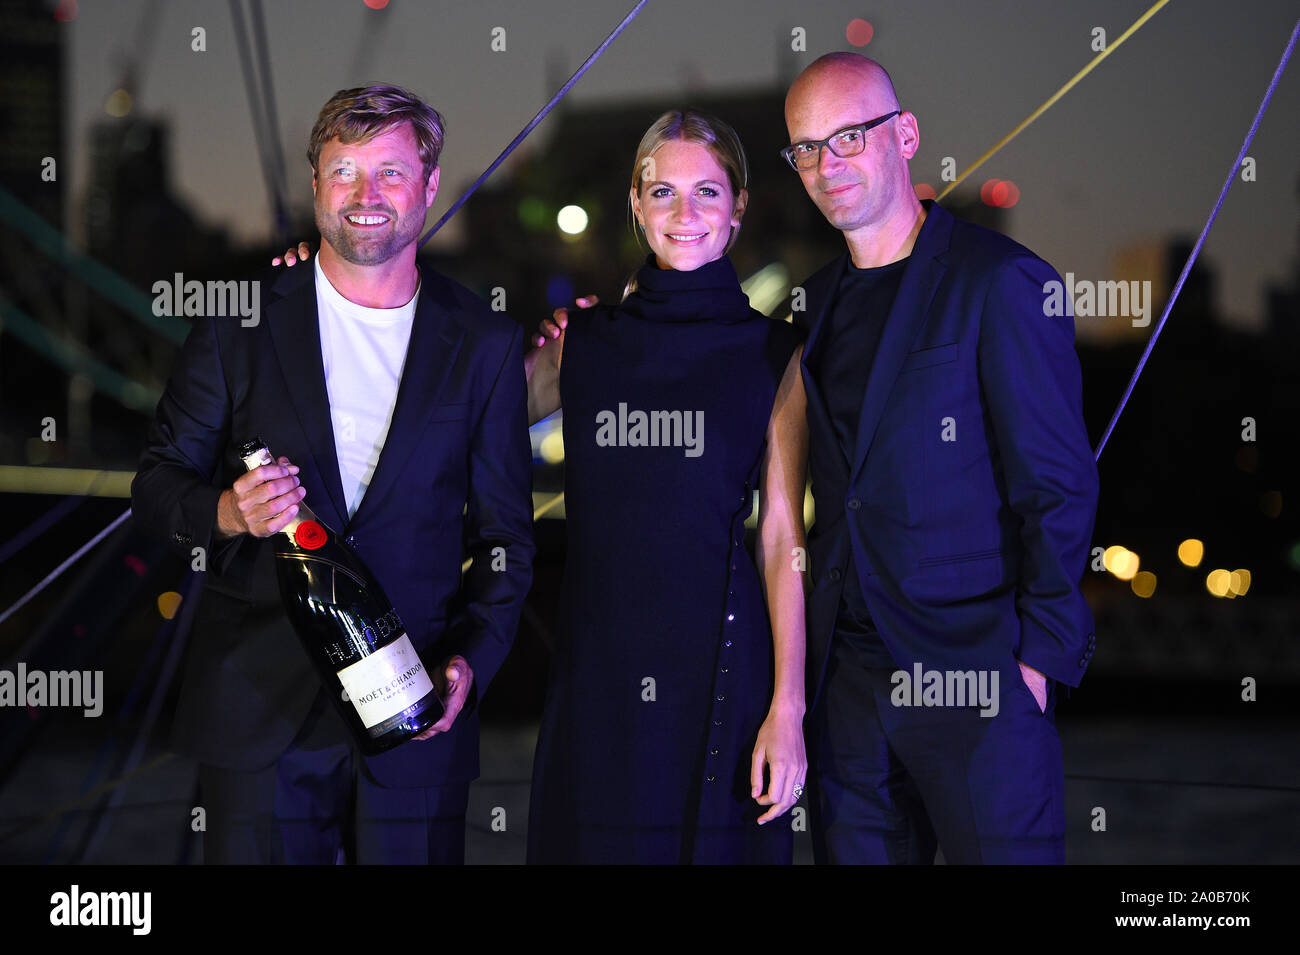 (left to right) Yachtsman Alex Thomson, Poppy Delevingne and Hugo Boss CEO Mark Langer at the christening ceremony for the Hugo Boss yacht in London. Stock Photo